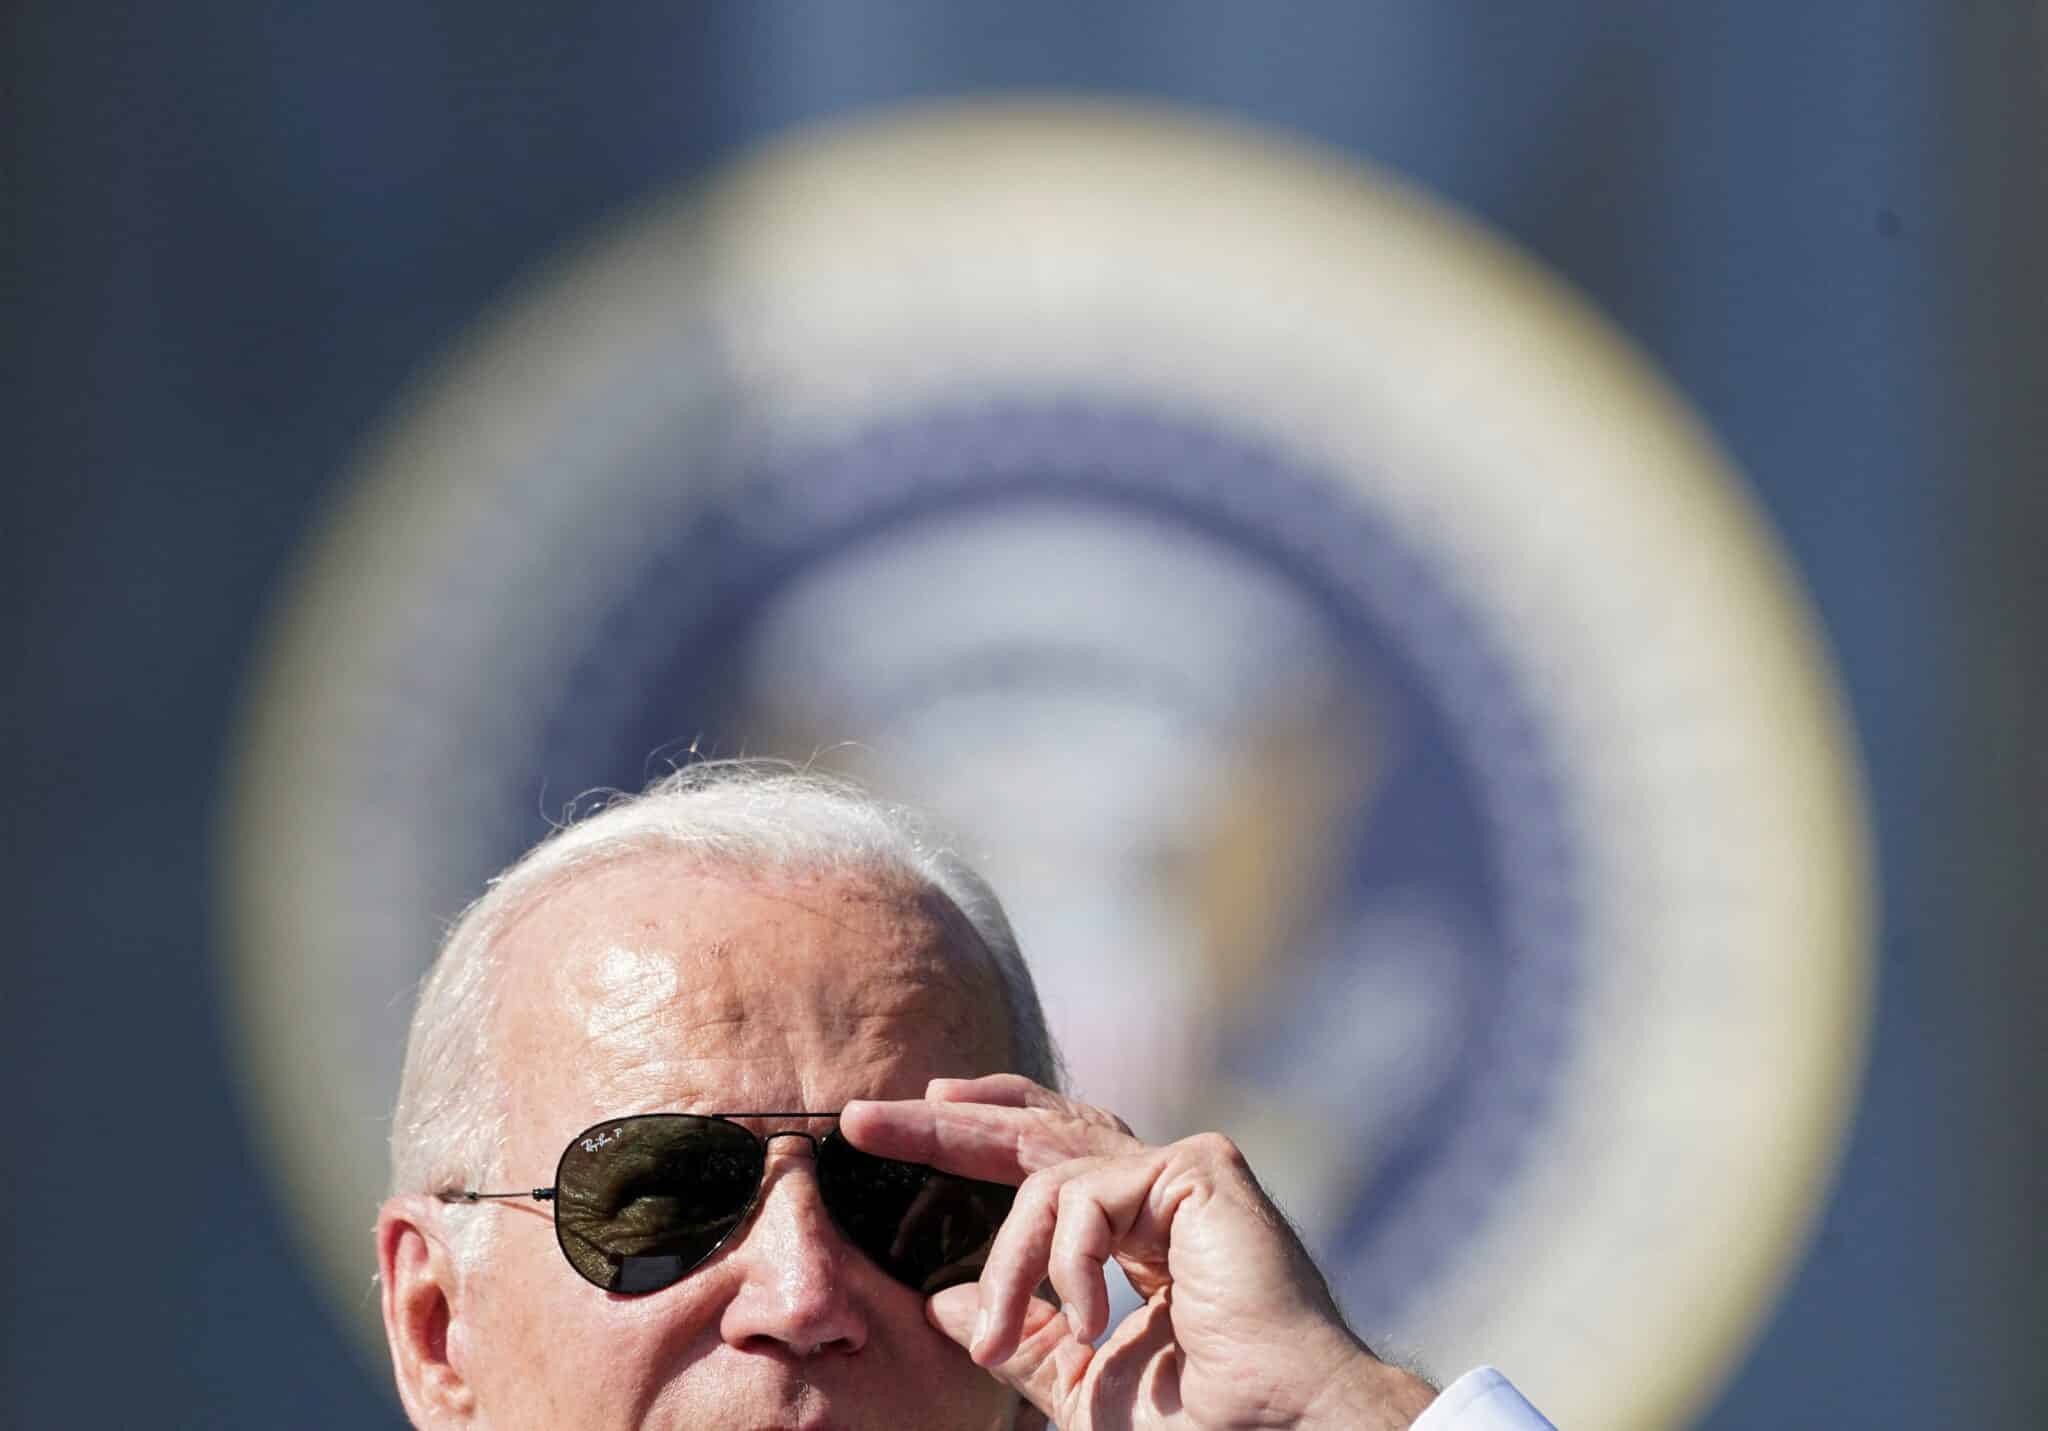 U.S. President Joe Biden adjusts his glasses as he celebrates the enactment of the Inflation Reduction Act of 2022 on the South Lawn at the White House in Washington Sept. 13, 2022. Biden signed the measure into law that August. On April 25, 2023, Biden announced that he will seek a second term in the White House. (OSV News photo/Kevin Lamarque, Reuters)